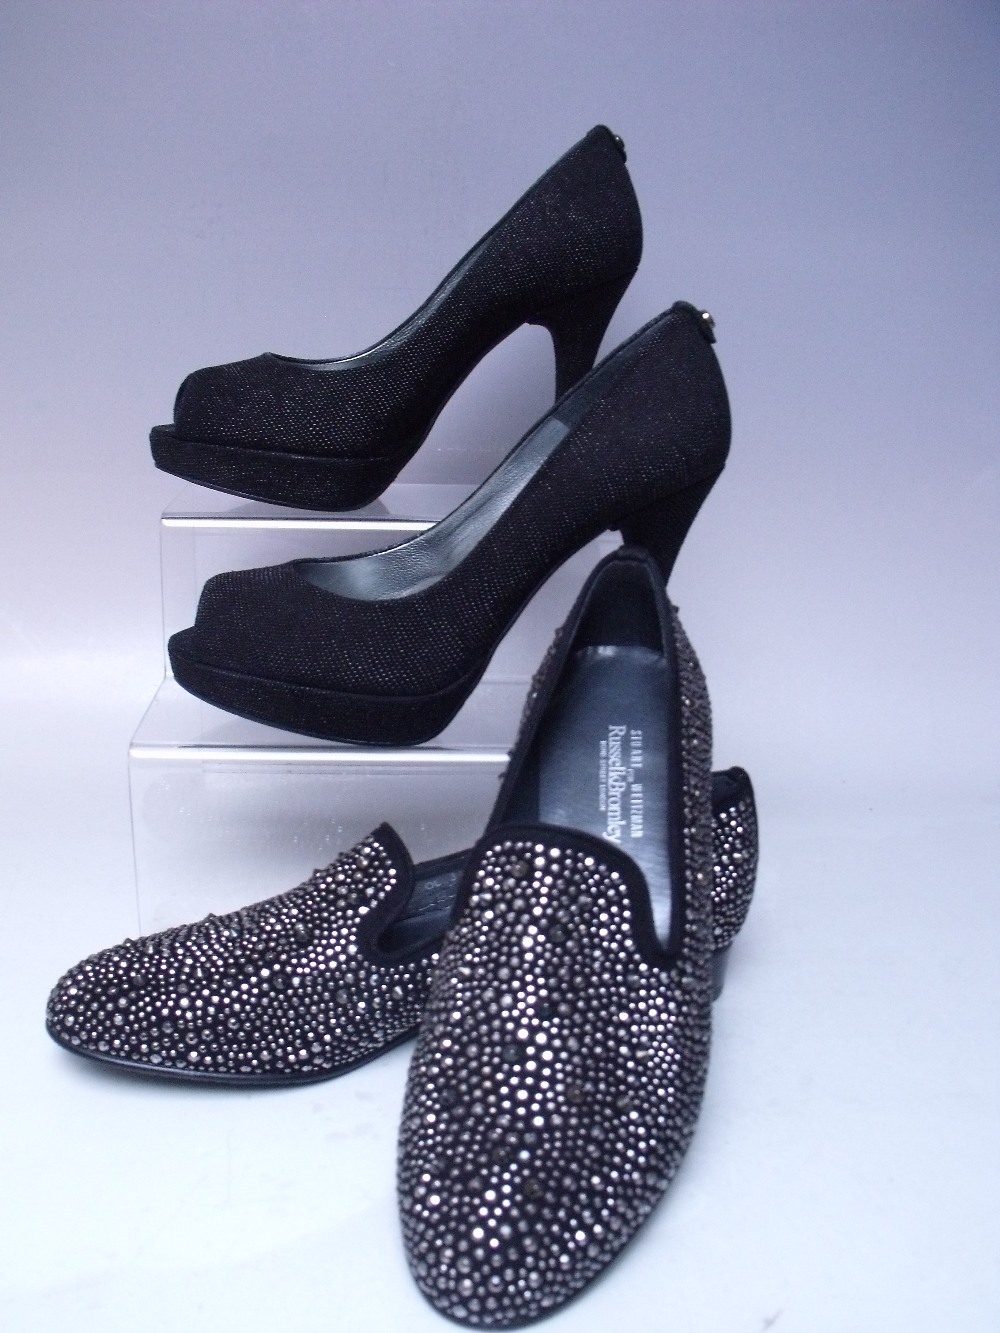 TWO PAIRS OF STUART WEITZMAN FOR RUSSELL BROMLEY SHOES, comprising a pair of black peep toed